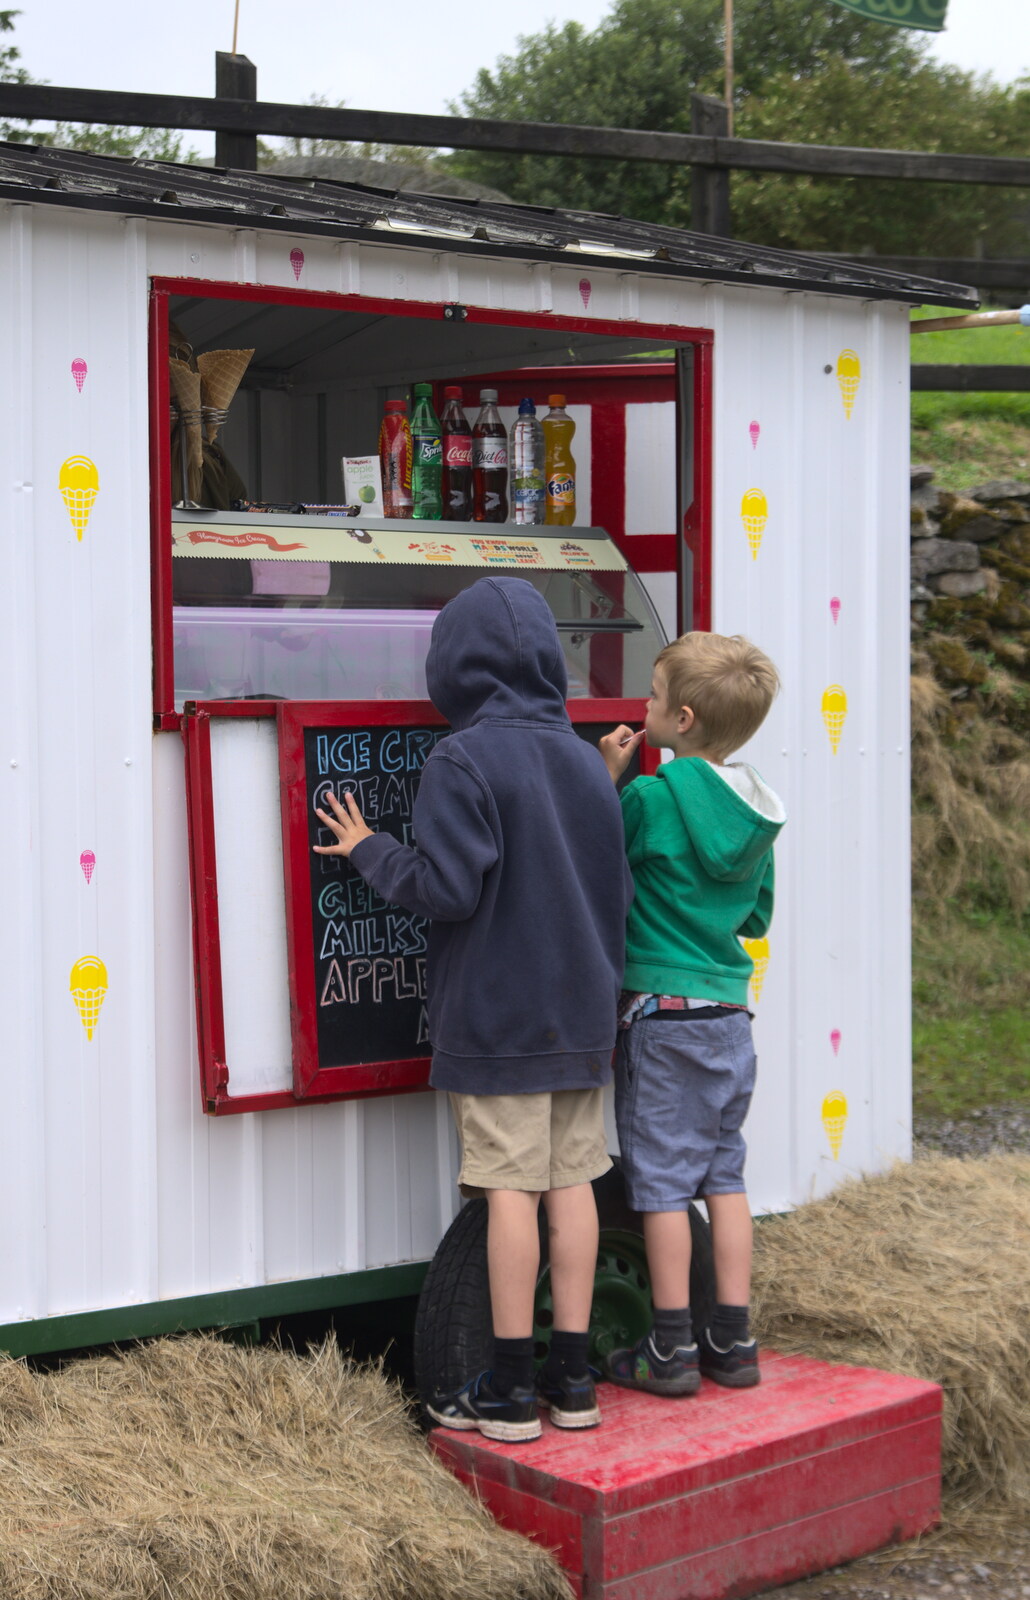 The boys queue up for ice cream from Staigue Fort and the Beach, Kerry, Ireland - 2nd August 2017